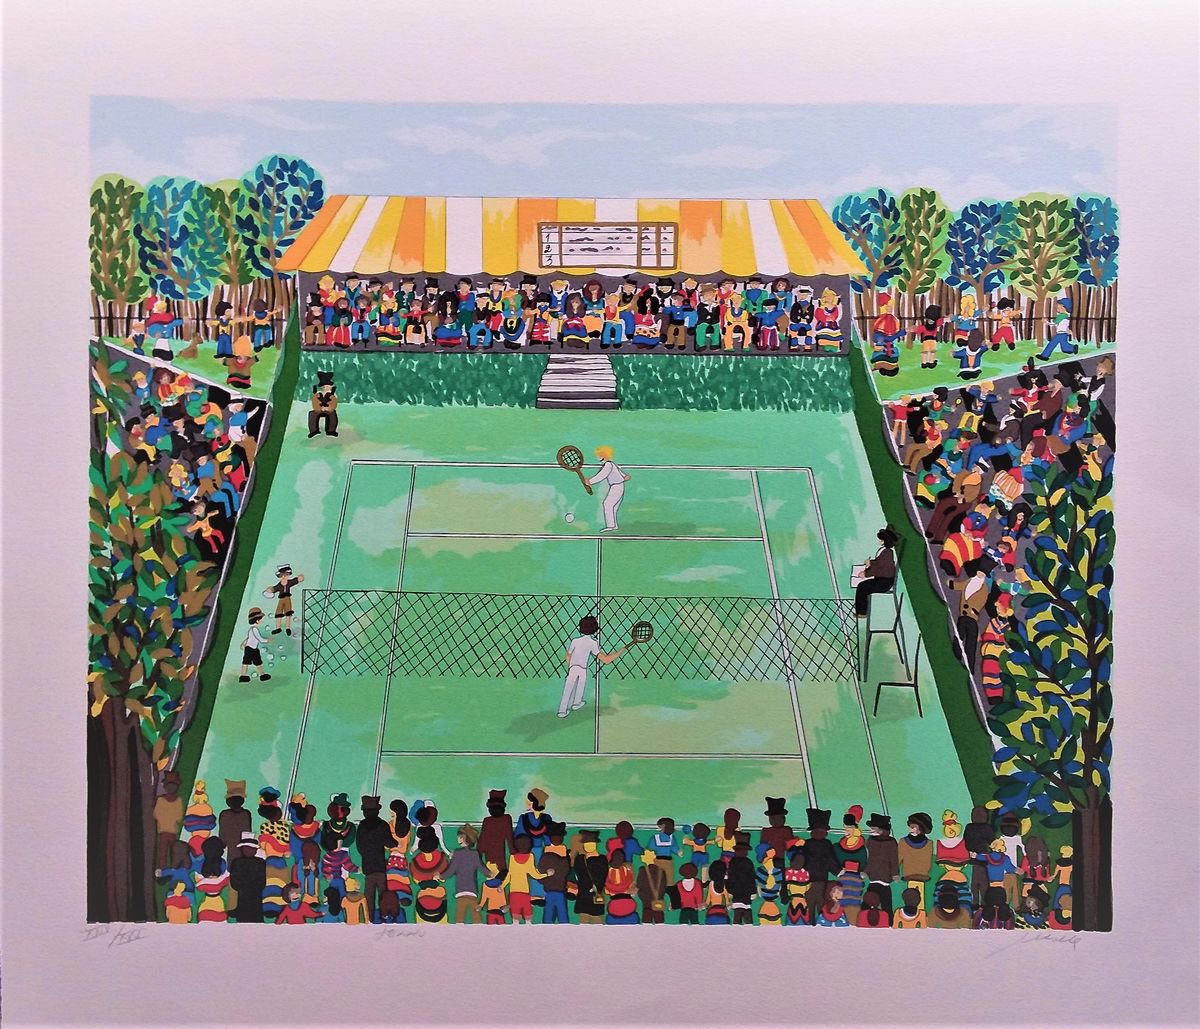 Tennis by Ivel Muller